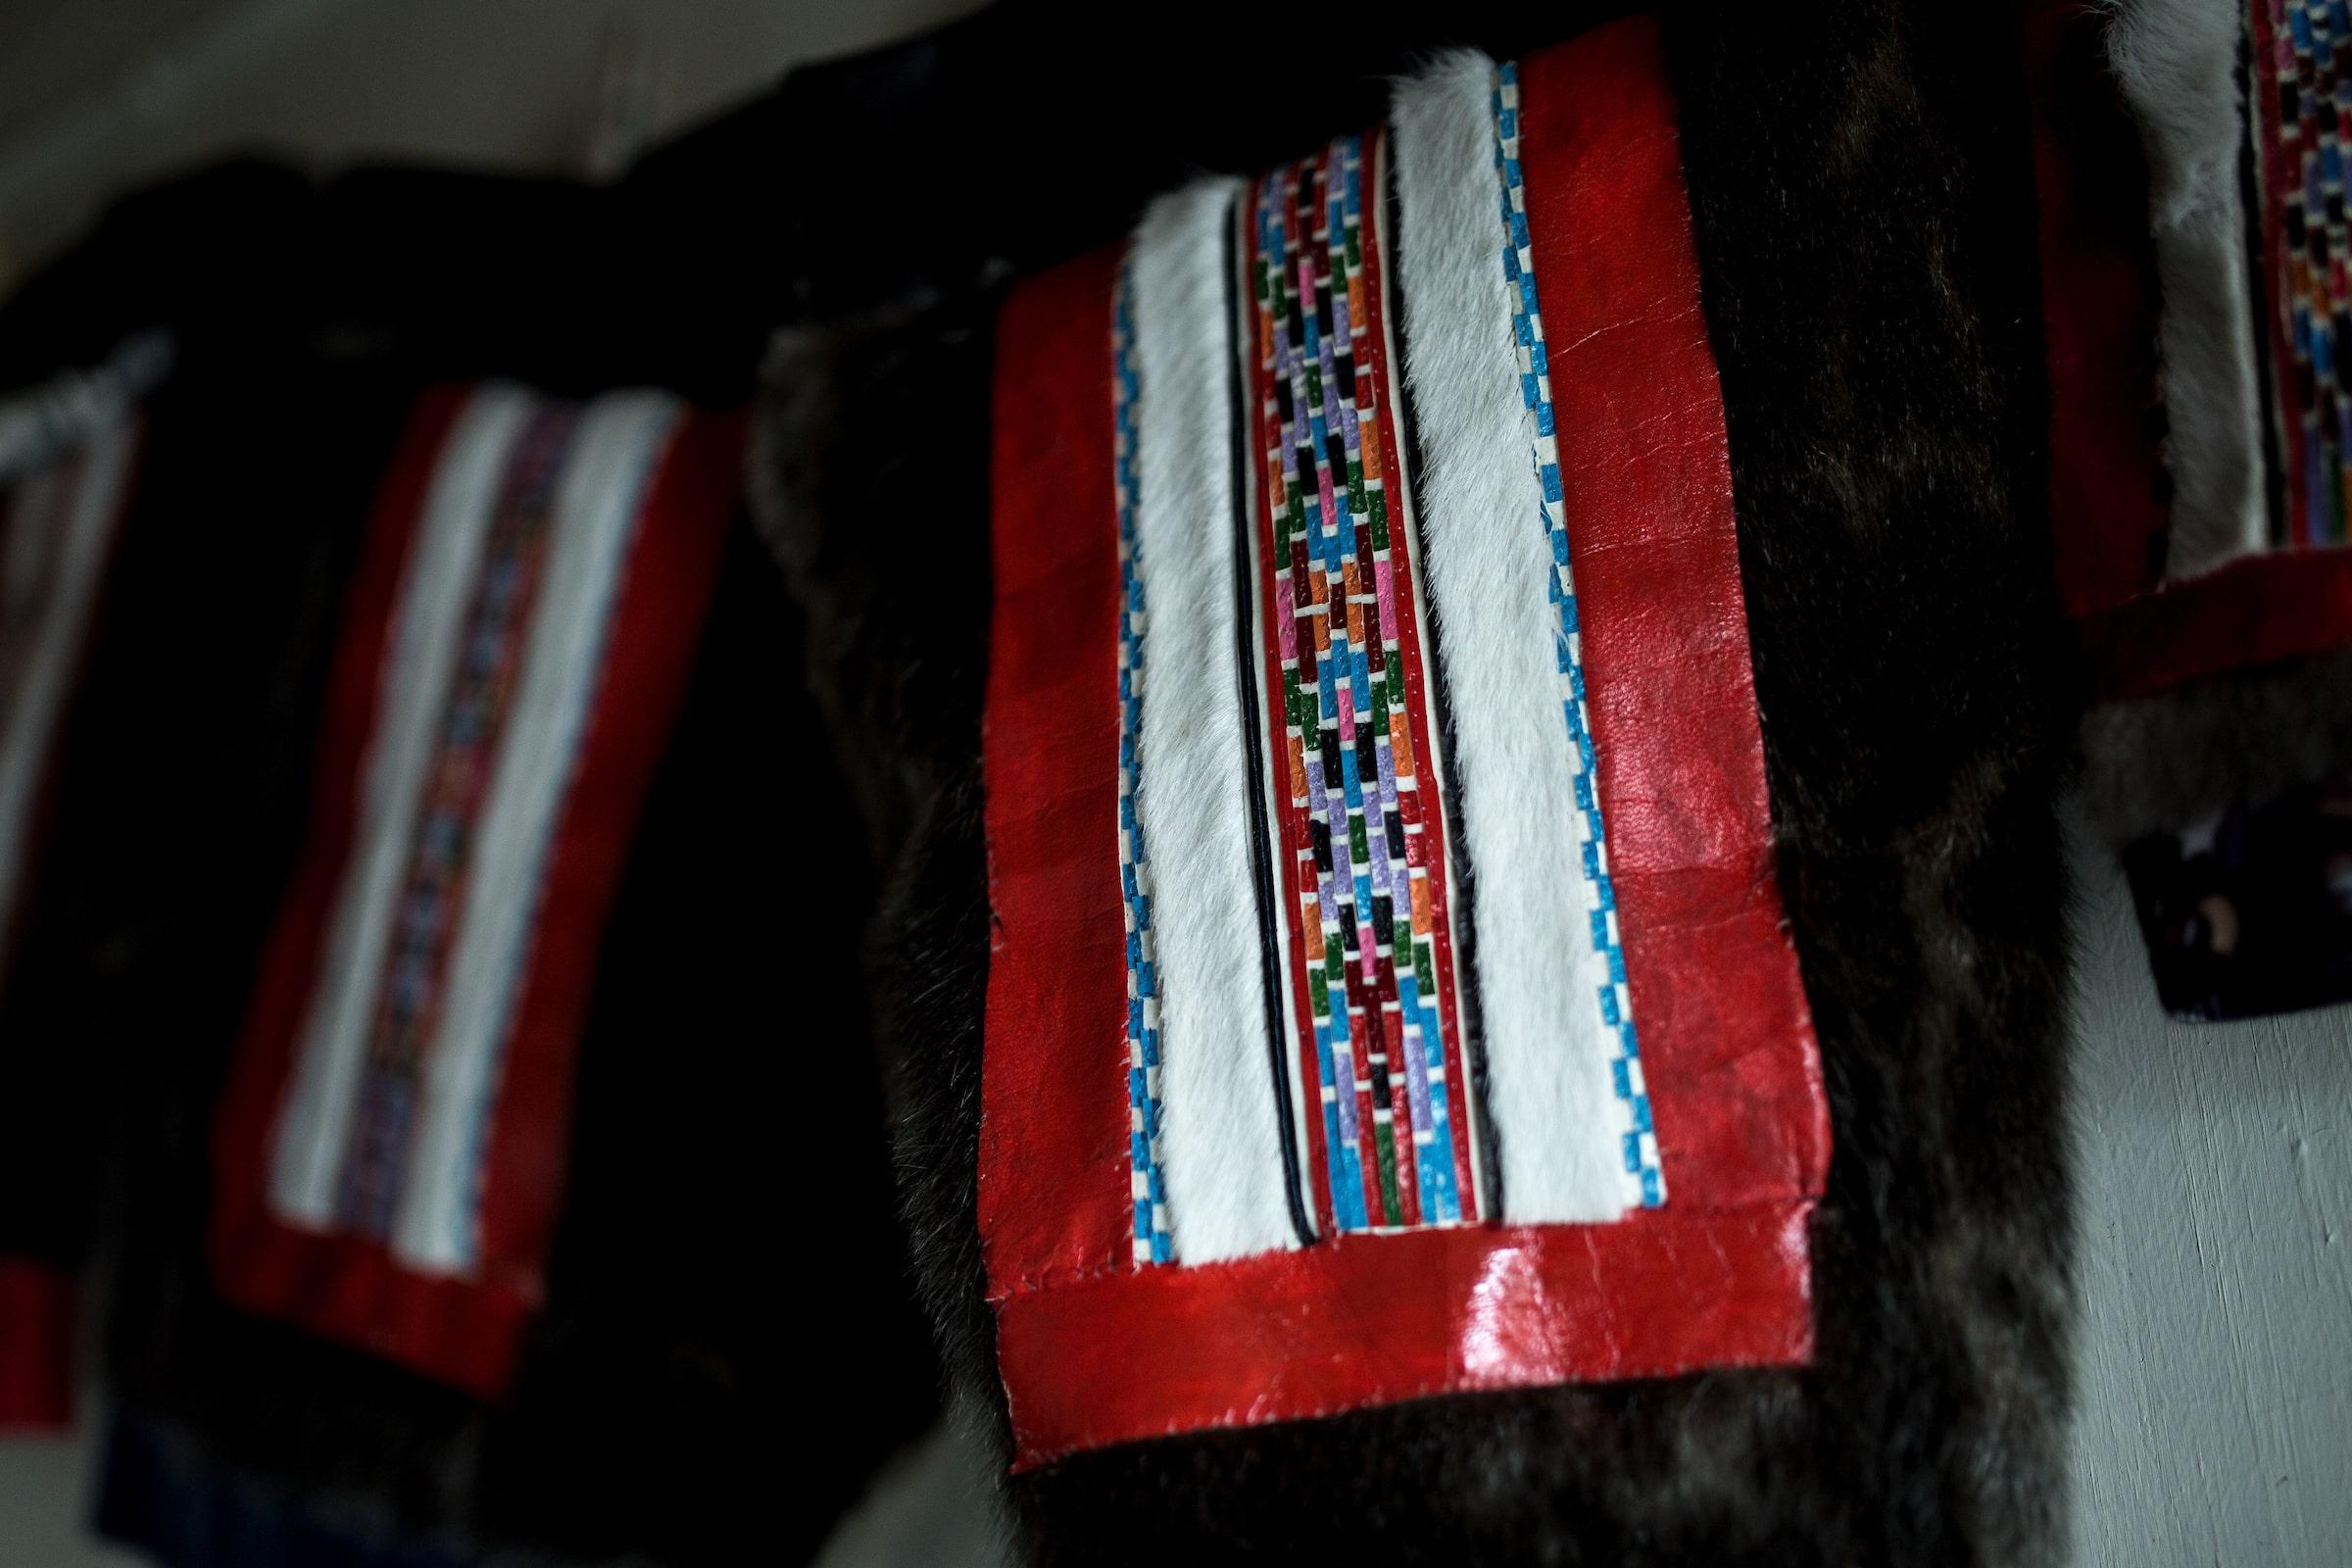 Parts of a national costume on display in Itilleq in Greenland. Photo by Mads Pihl - Visit Greenland